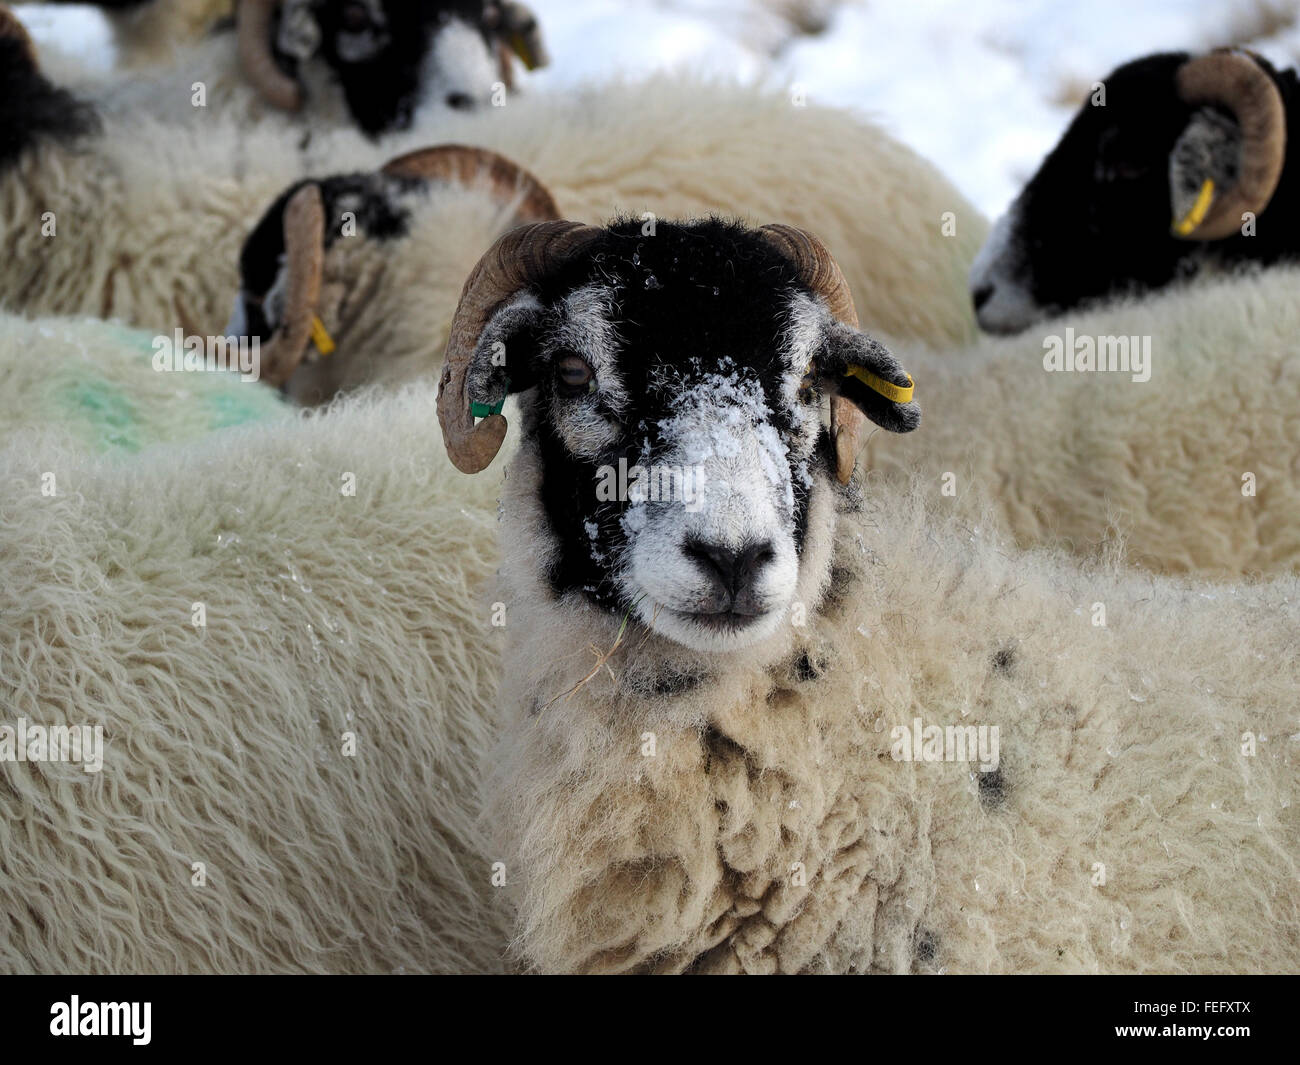 ewe with yellow blue ear tags and snow on face  in flock of black faced sheep waiting for feed in snowy winter conditions Stock Photo